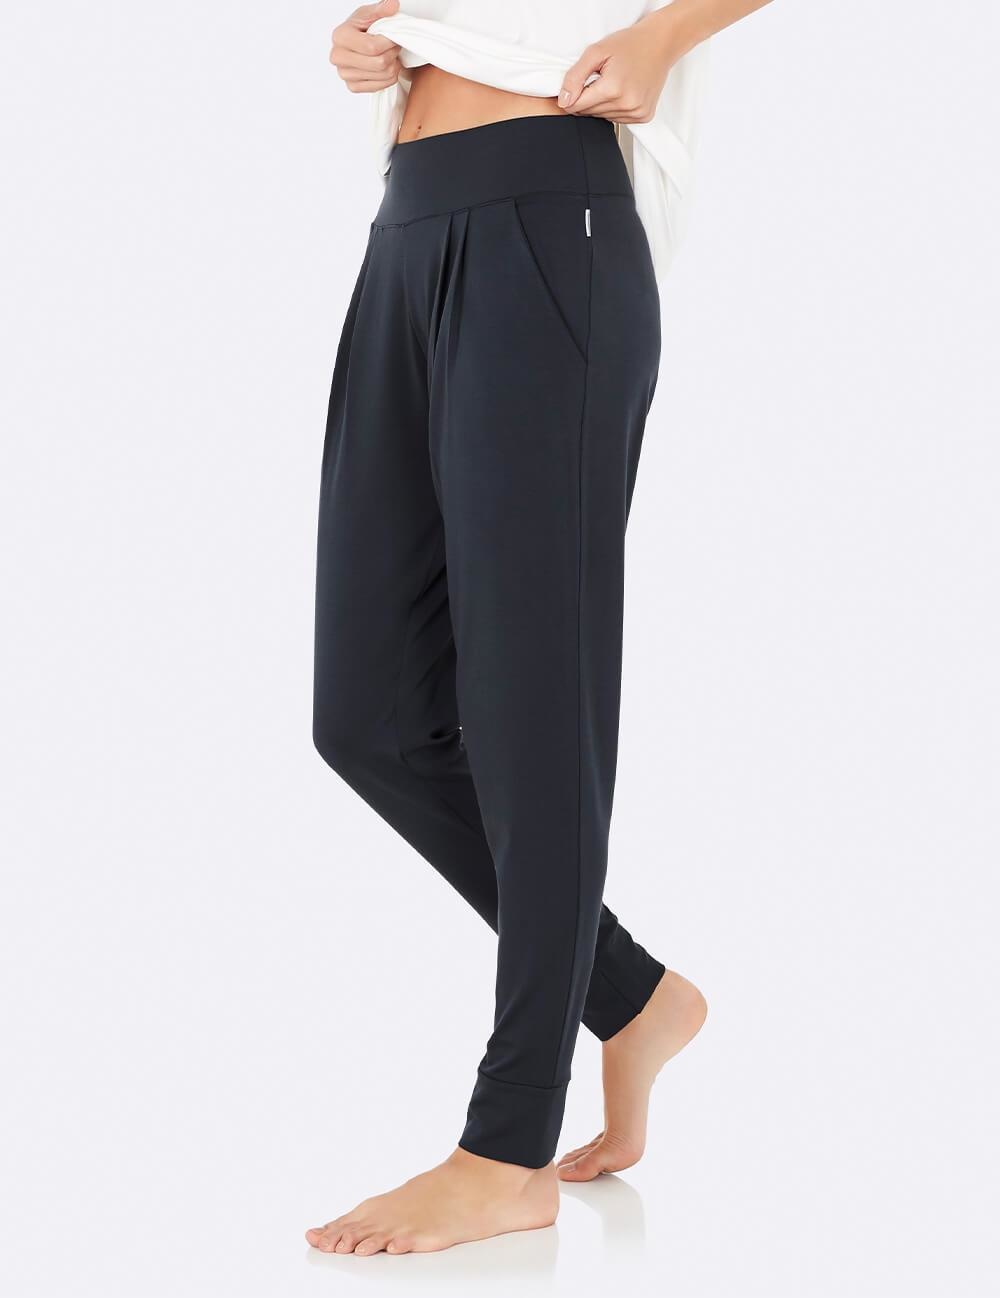 Downtime Lounge Pants in Black